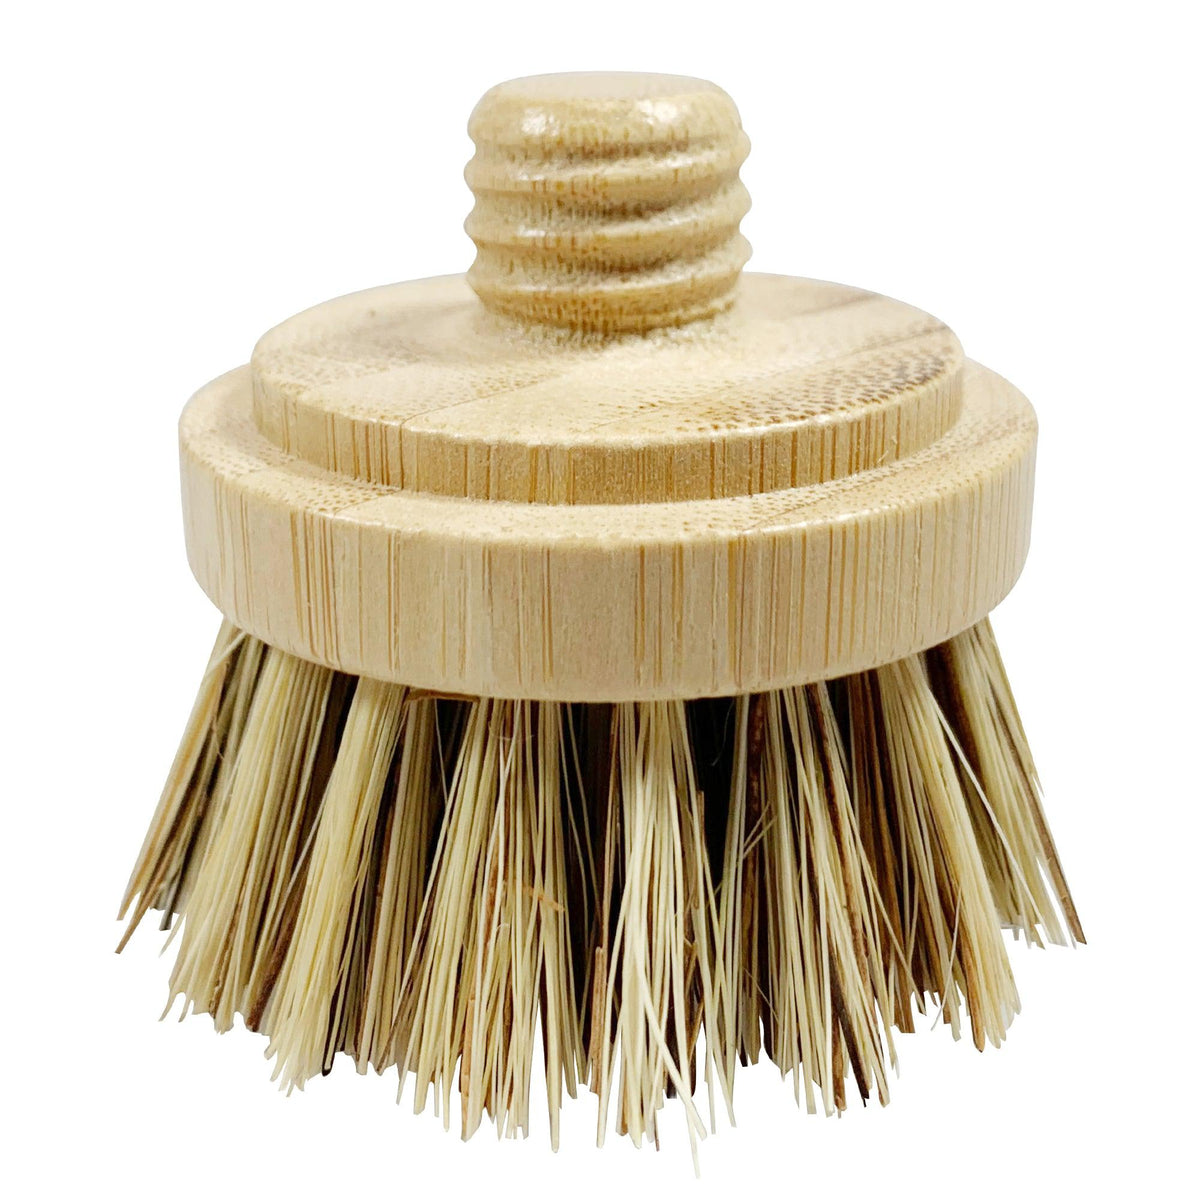 Dish Brush - Soft Bristle with compostable head